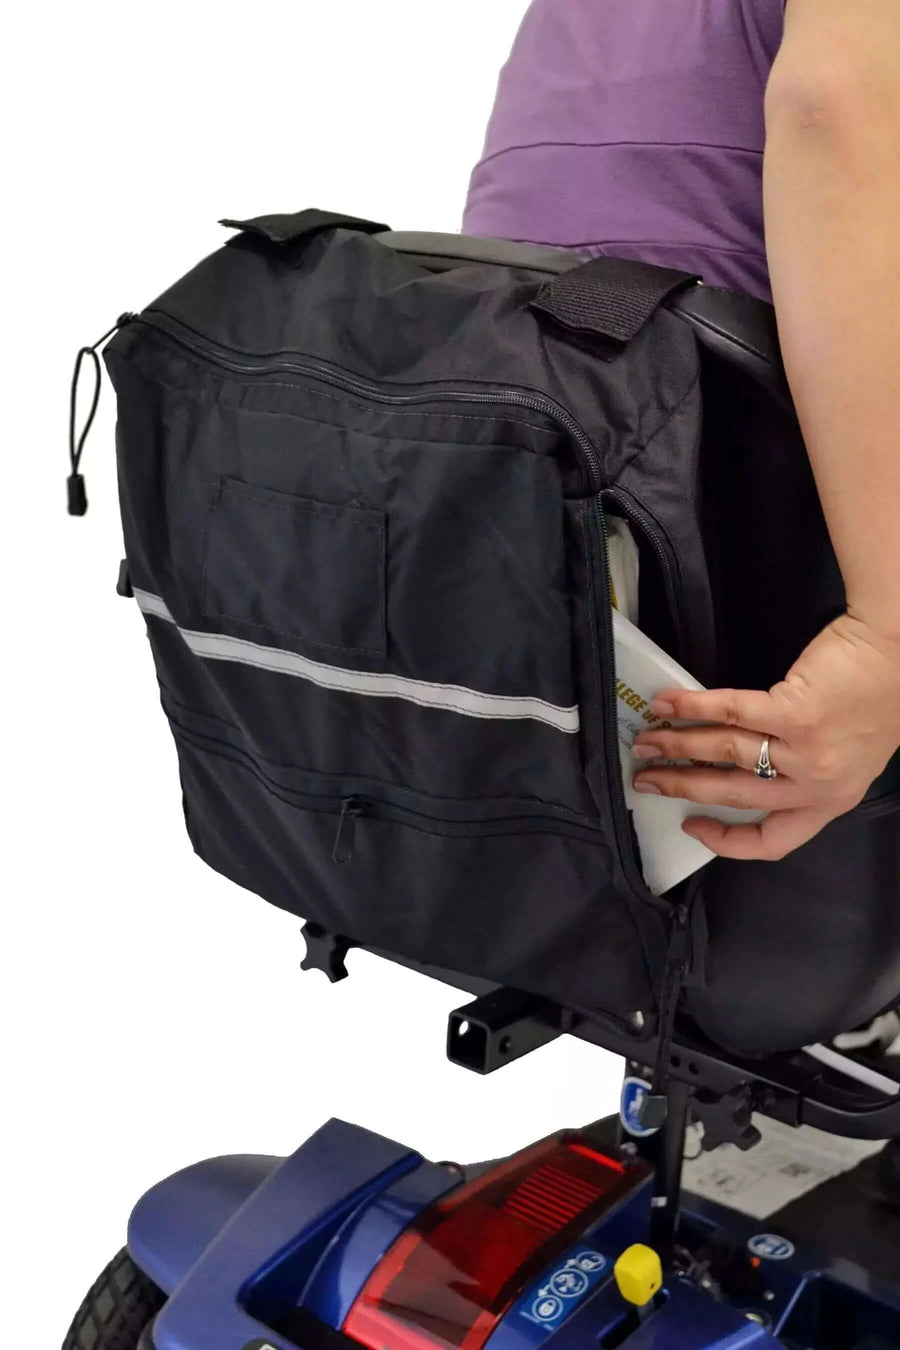 Diestco - Side Access Bag for Mobility Scooter with white background